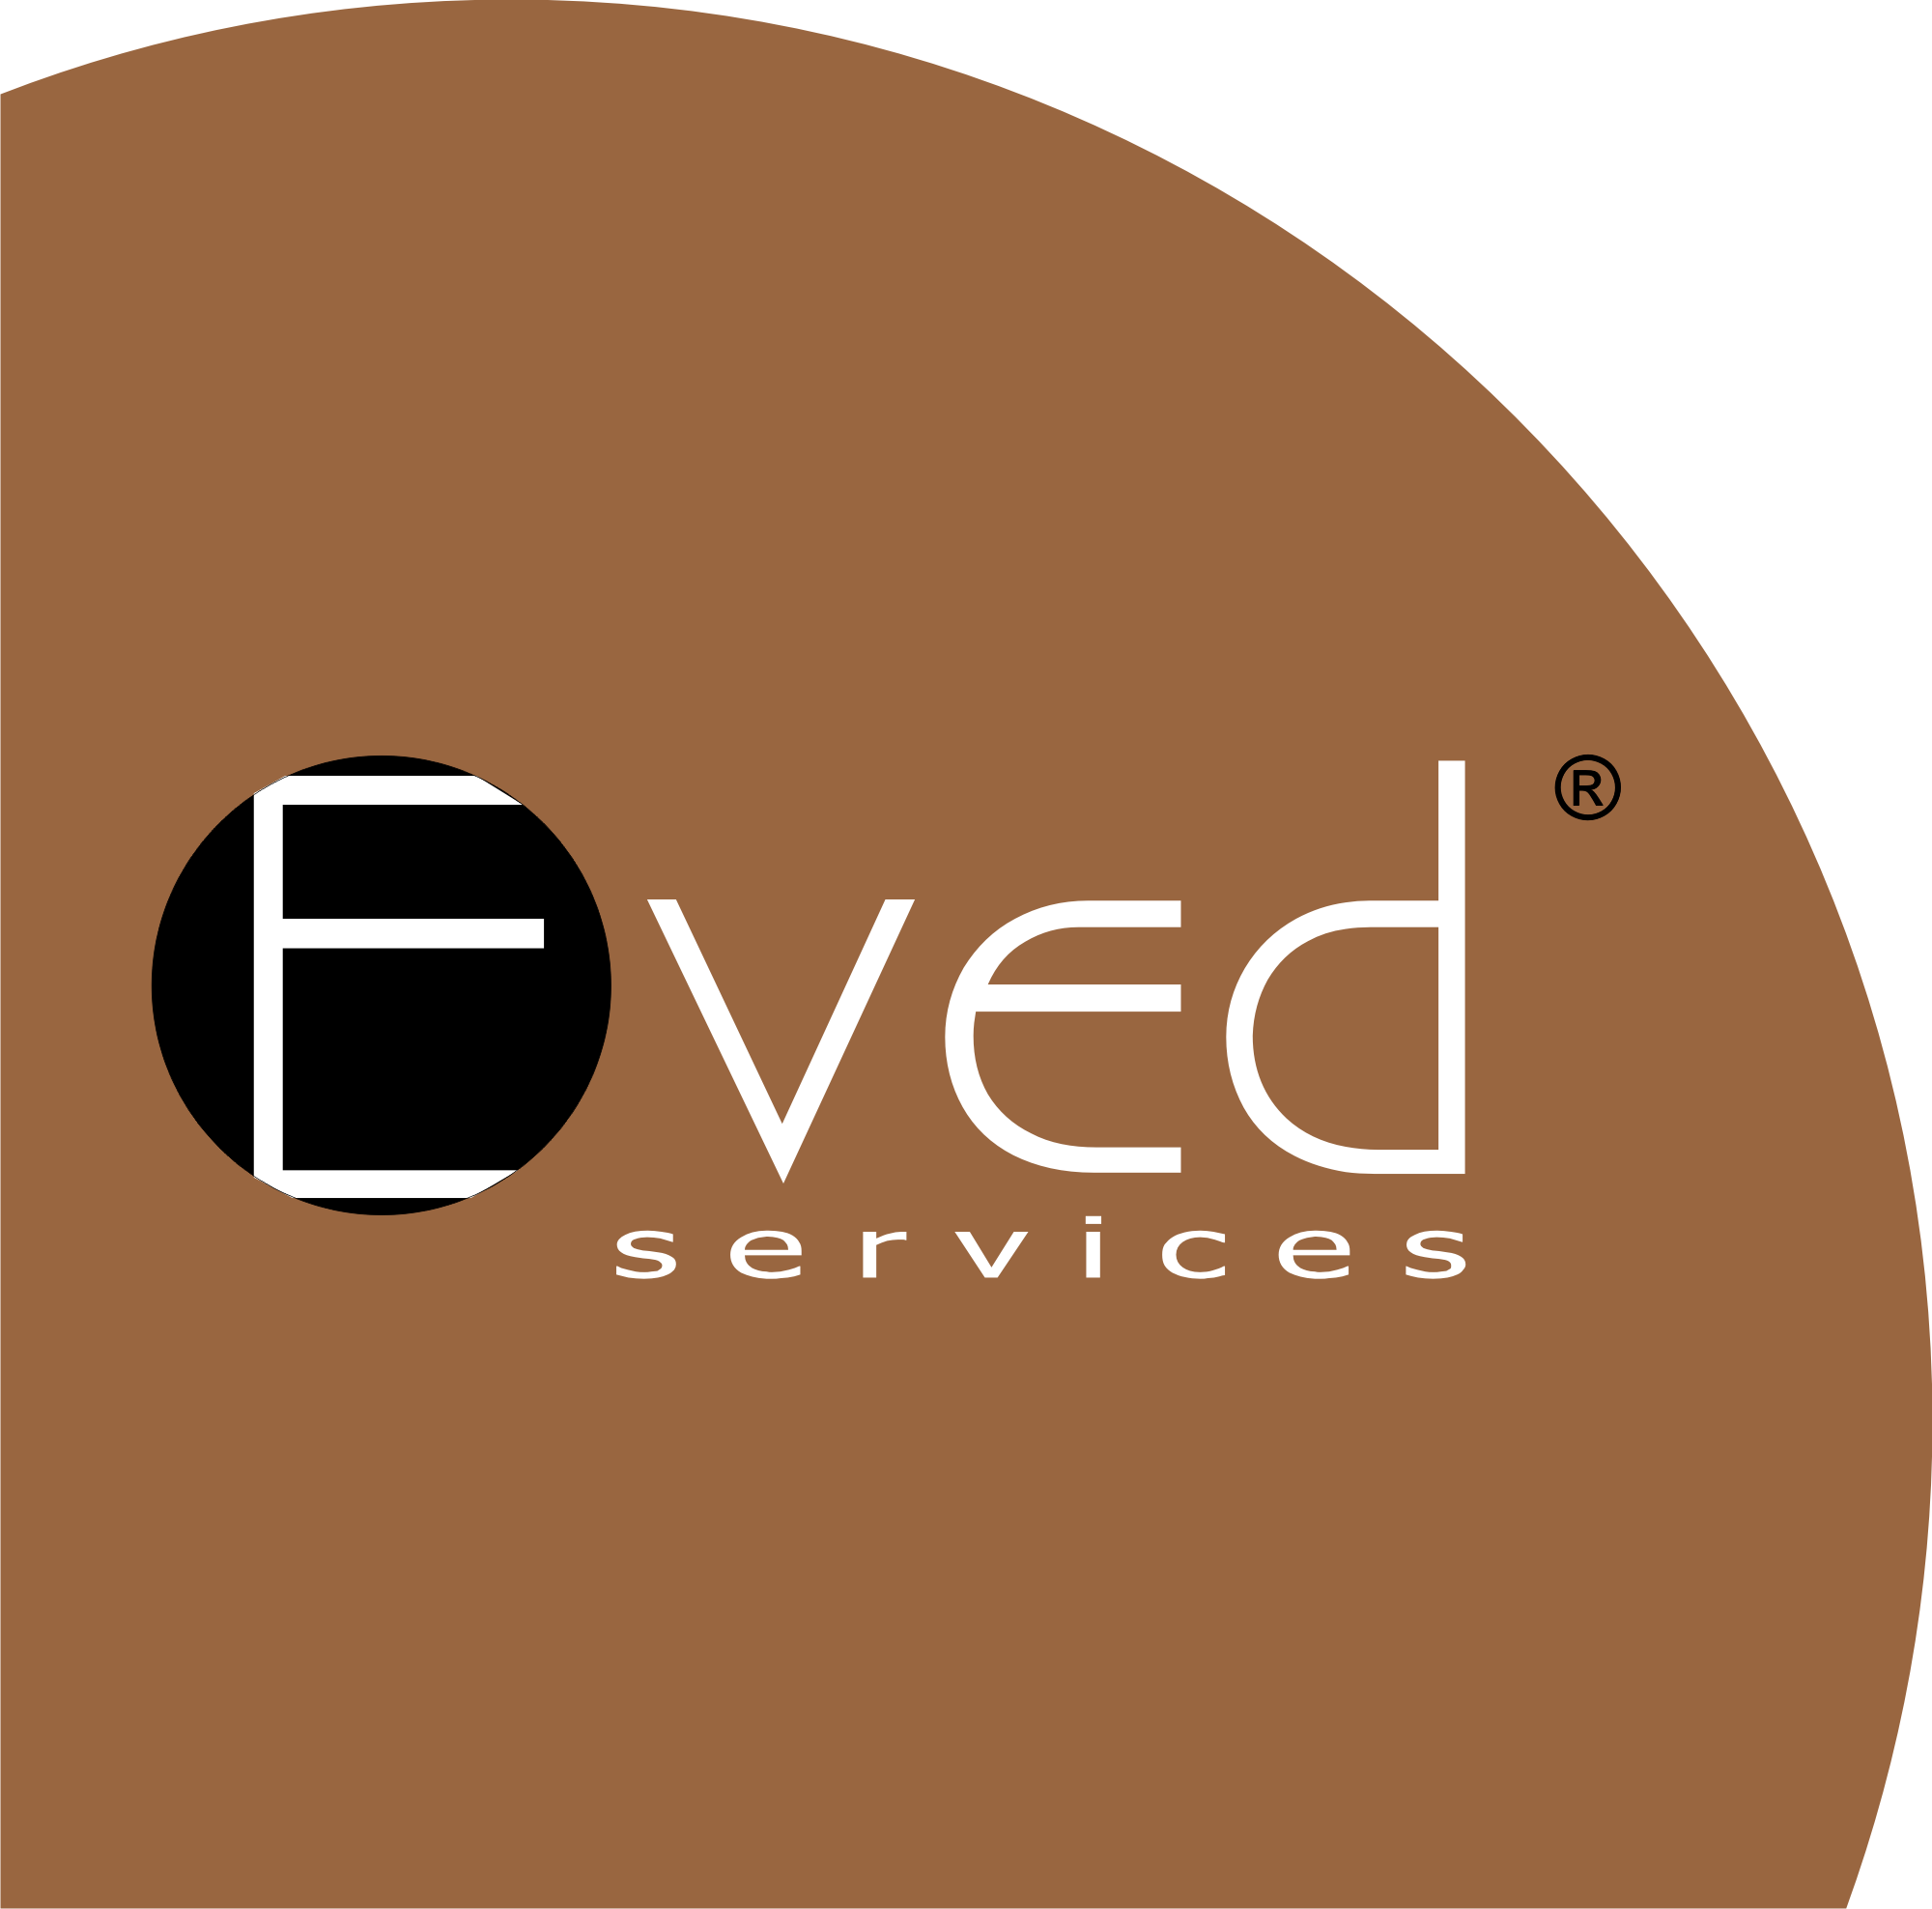 Eved Services